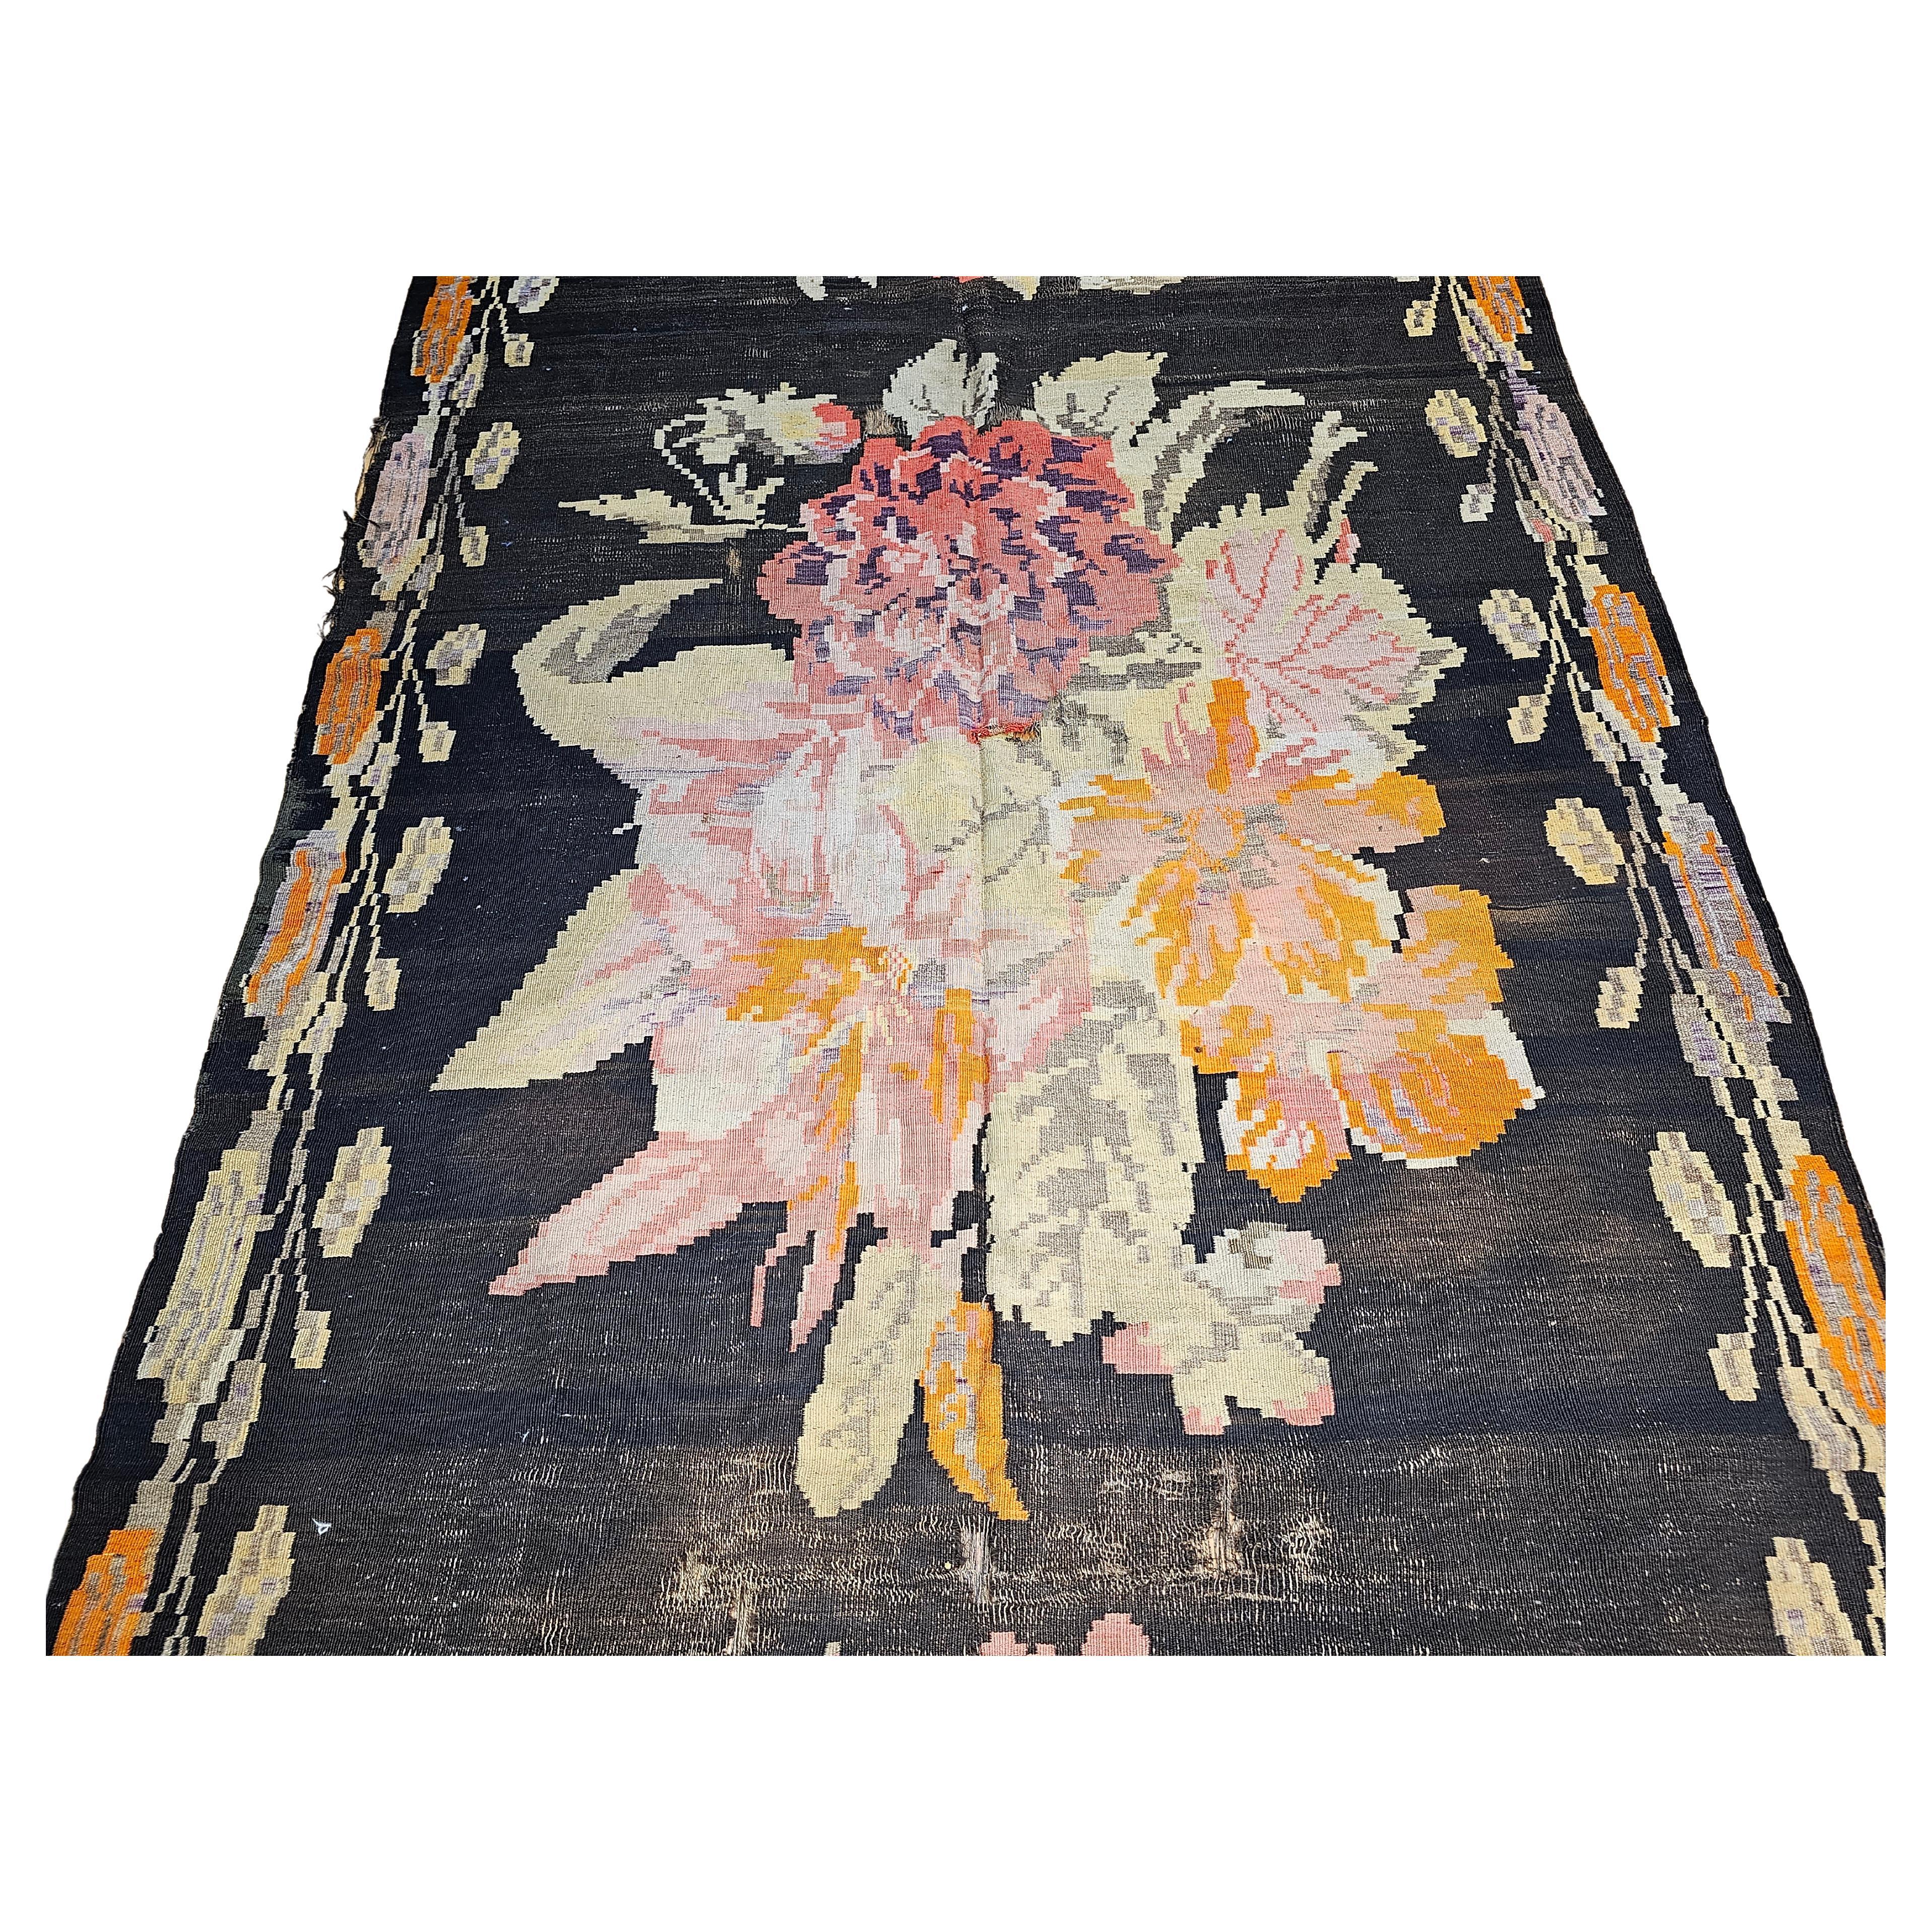 The Vintage Caucasian Karabagh Kilim is one of the rarest kilims from the Caucasus region and much sought after.  The Karabagh kilim is a true masterpiece in design and color. Three large bouquets of flowers in a field of abrash (variegated color)